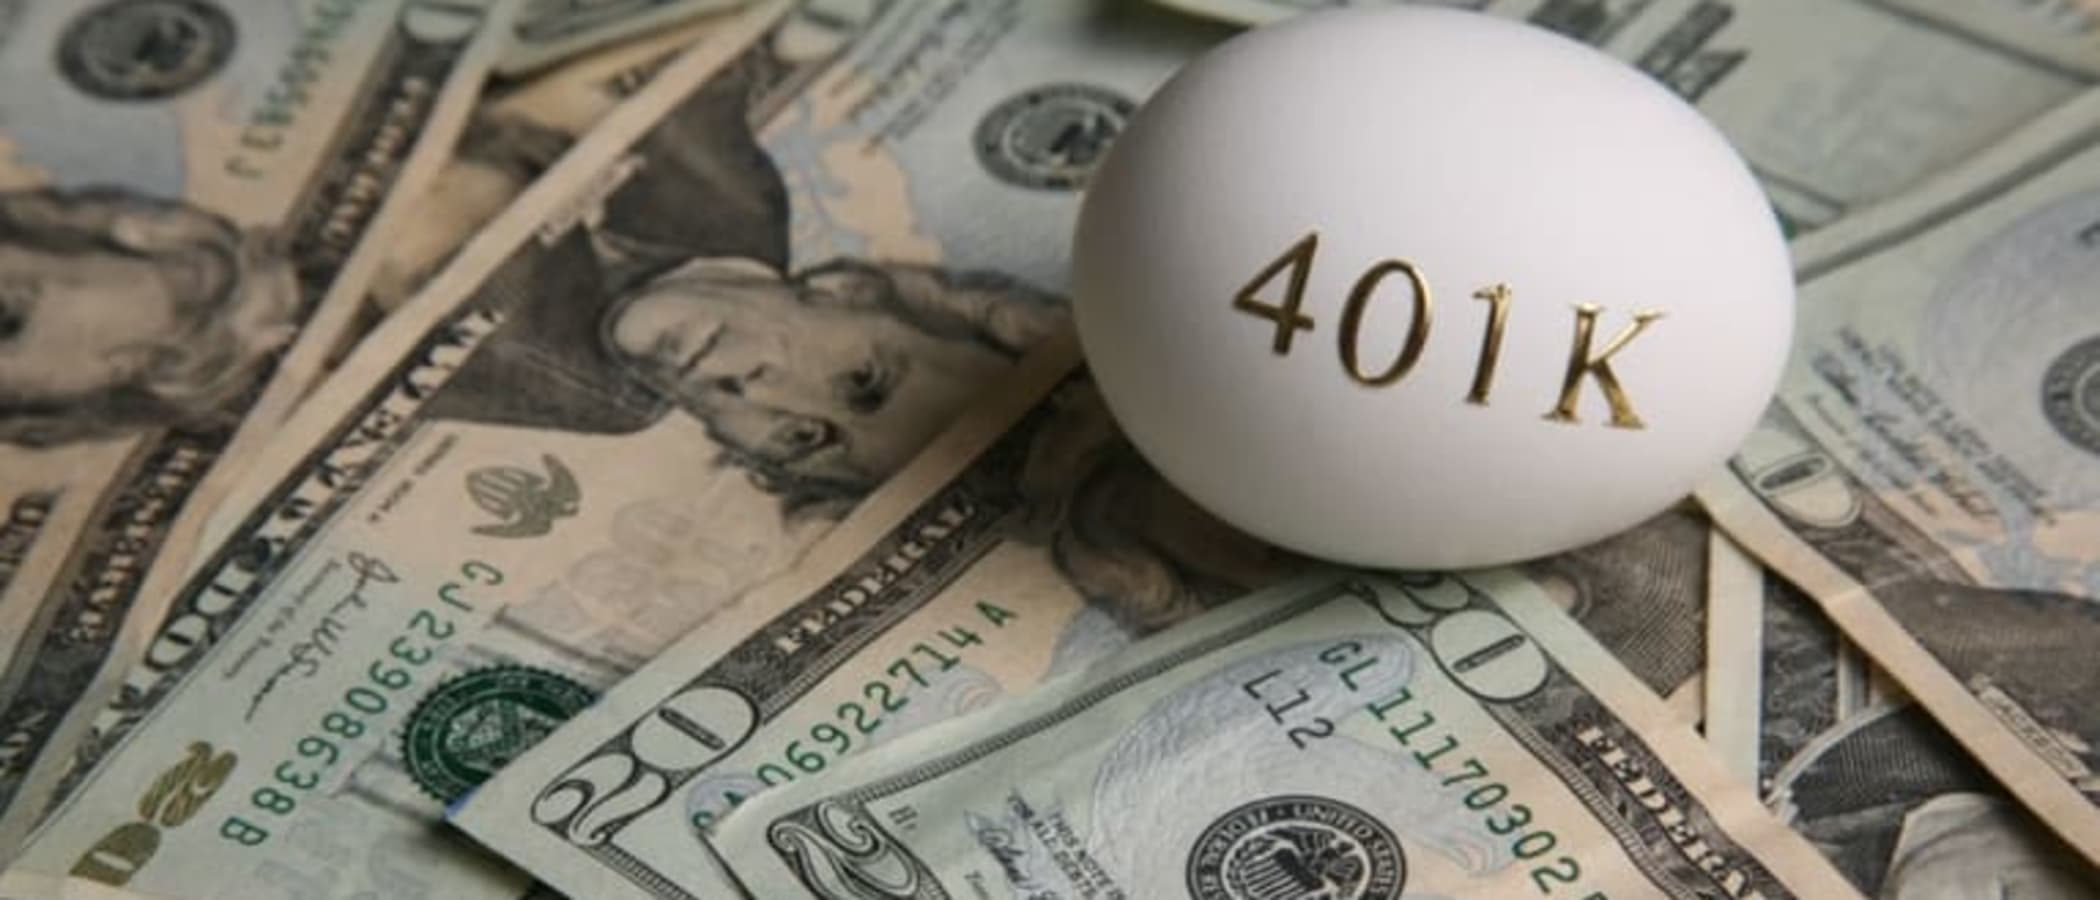 House Passes SECURE Act to Ease 401(k) Compliance, Promote Savings